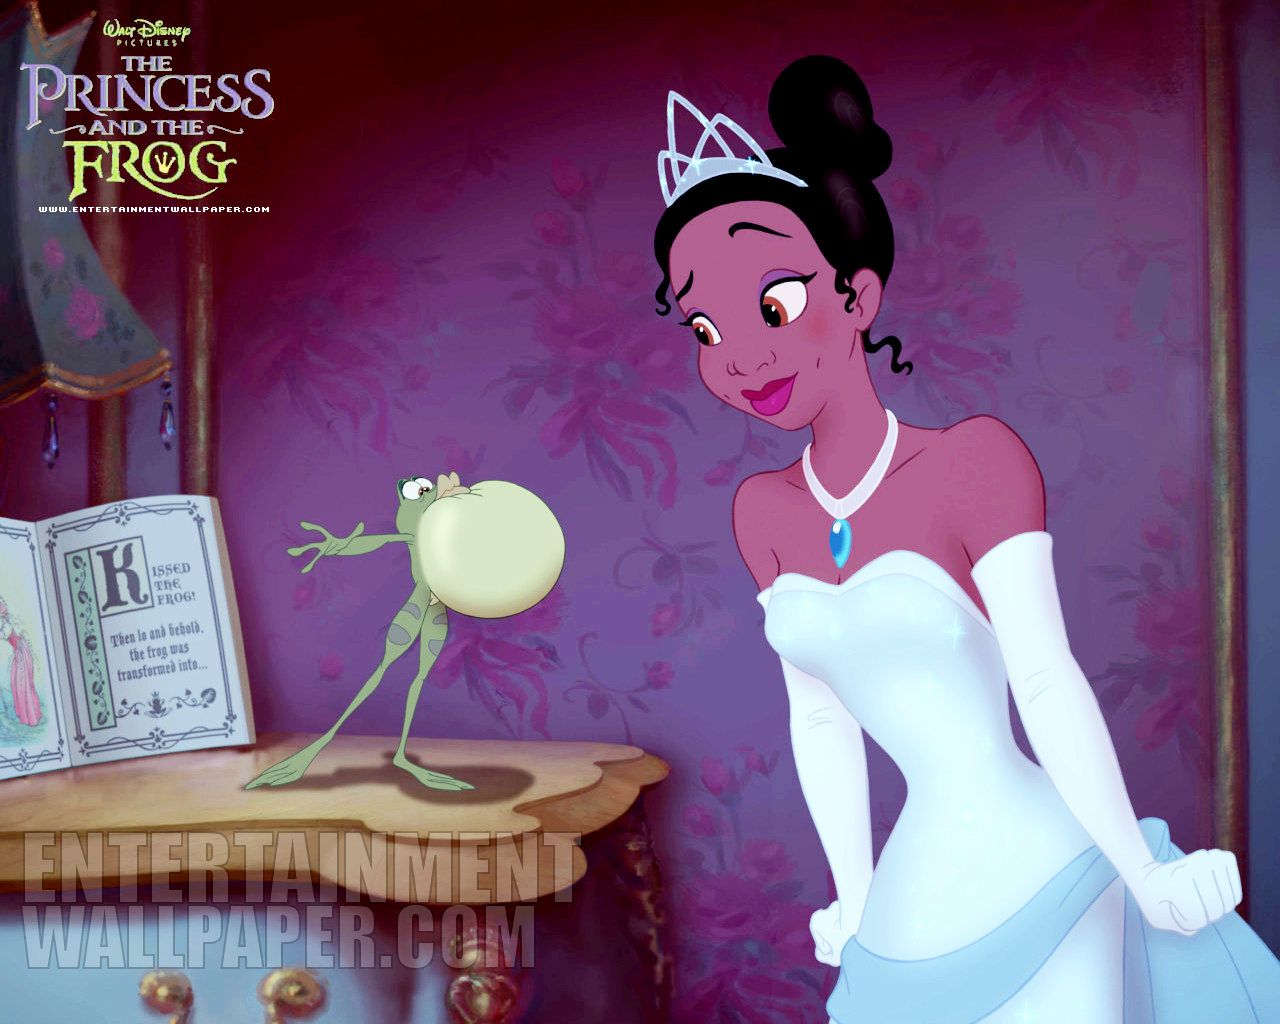 Wallpapers Disney The Princess and the Frog Cartoons Image #180386 ...